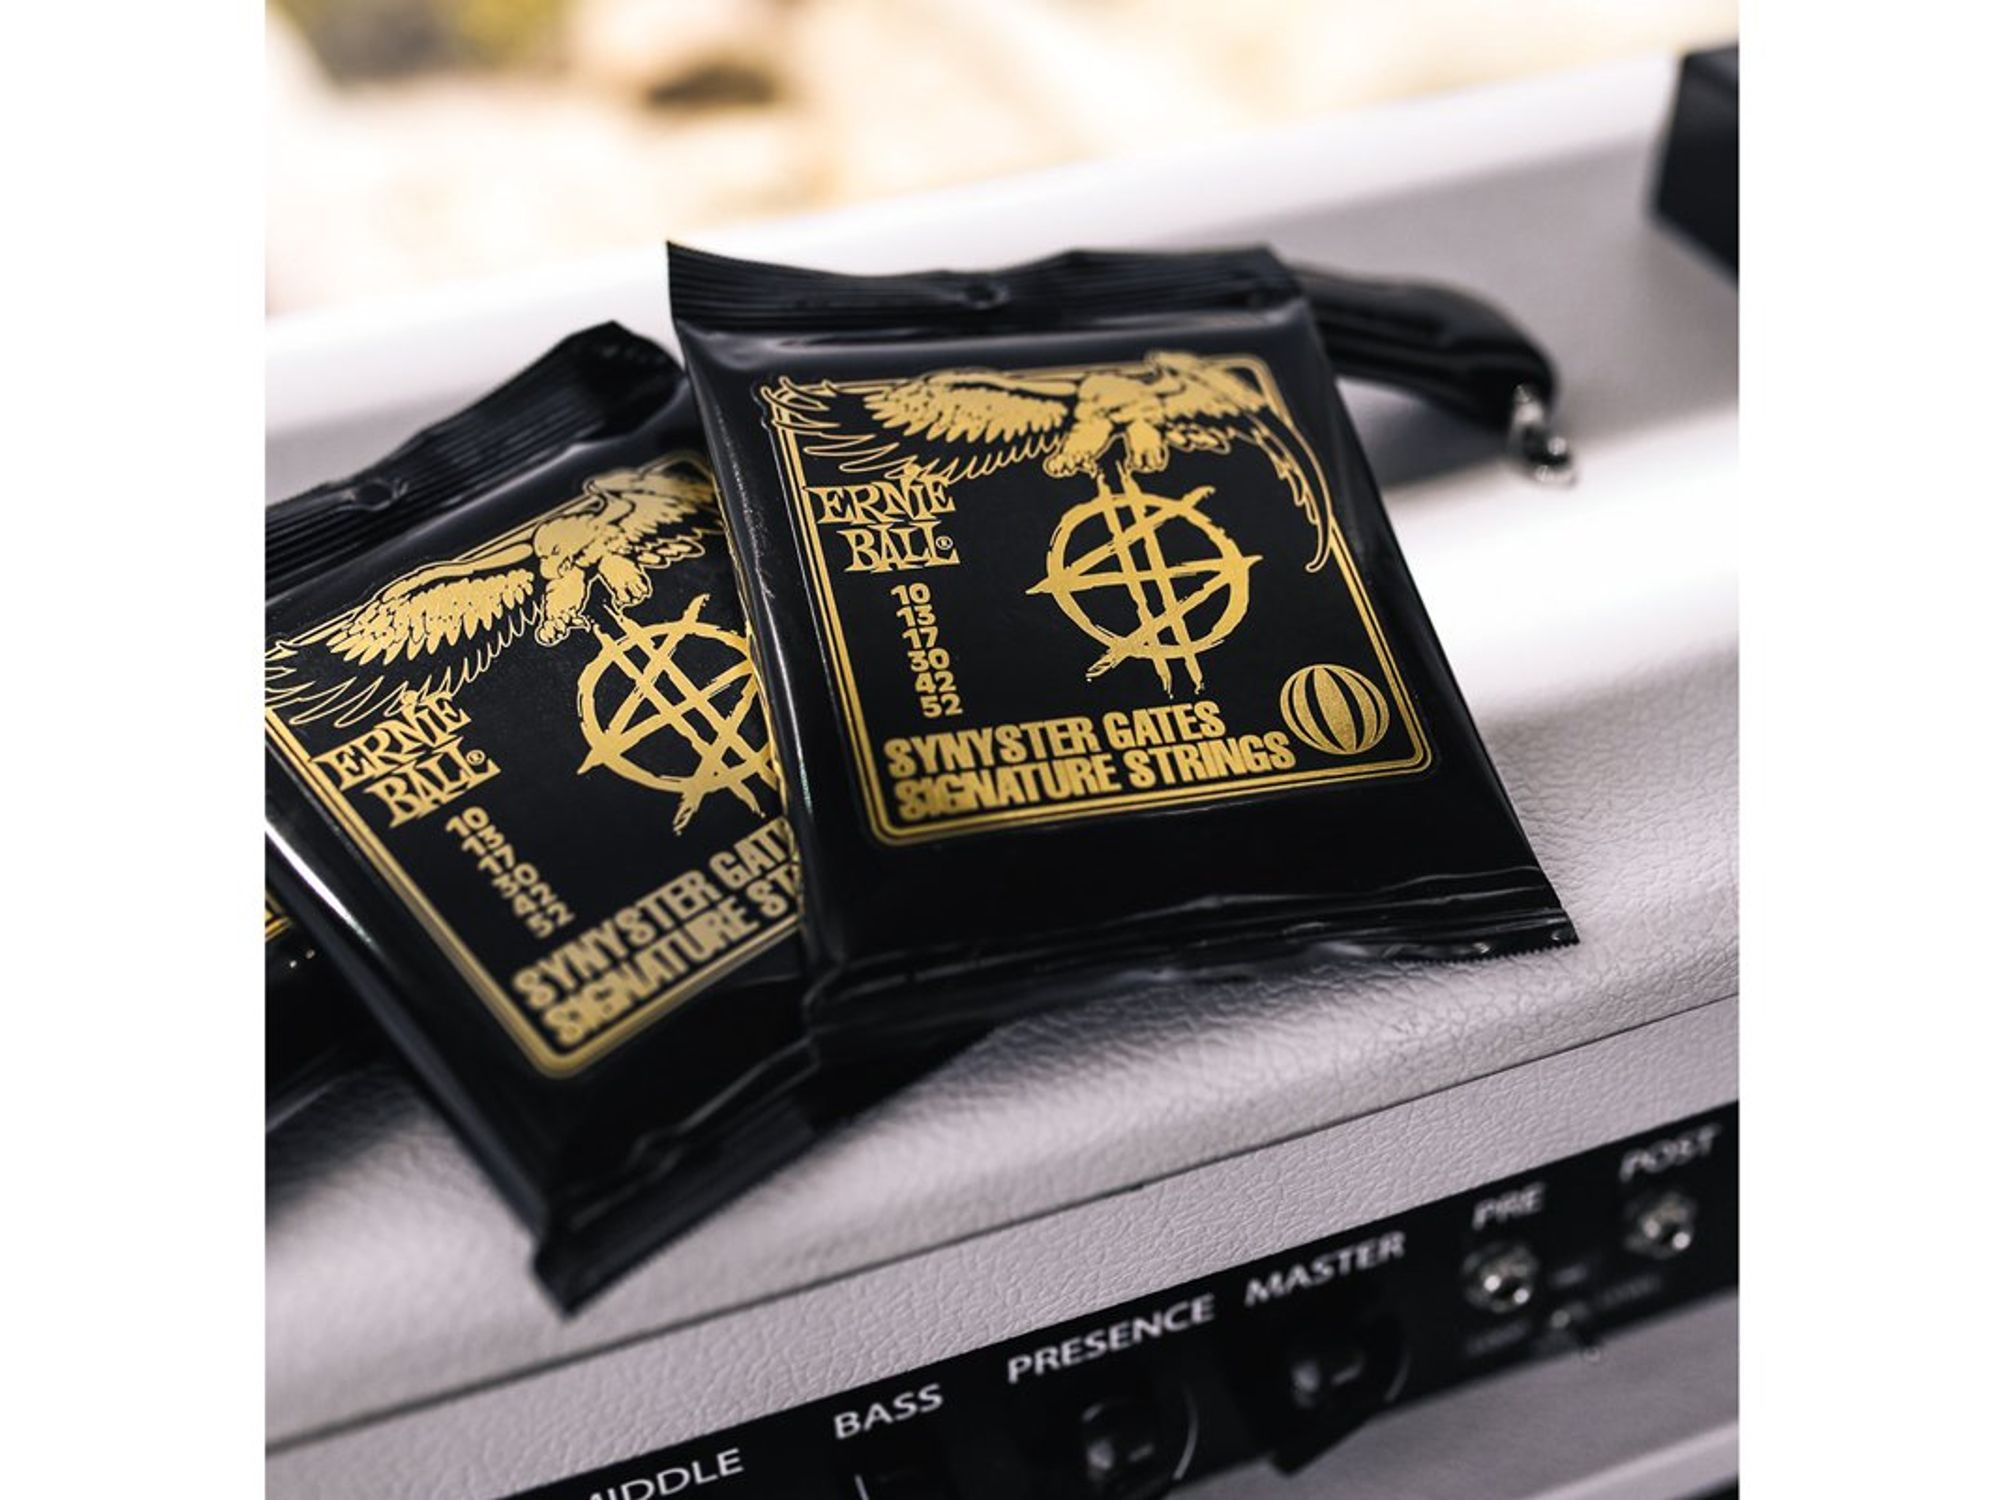 Ernie Ball Introduces Synyster Gates Signature Strings